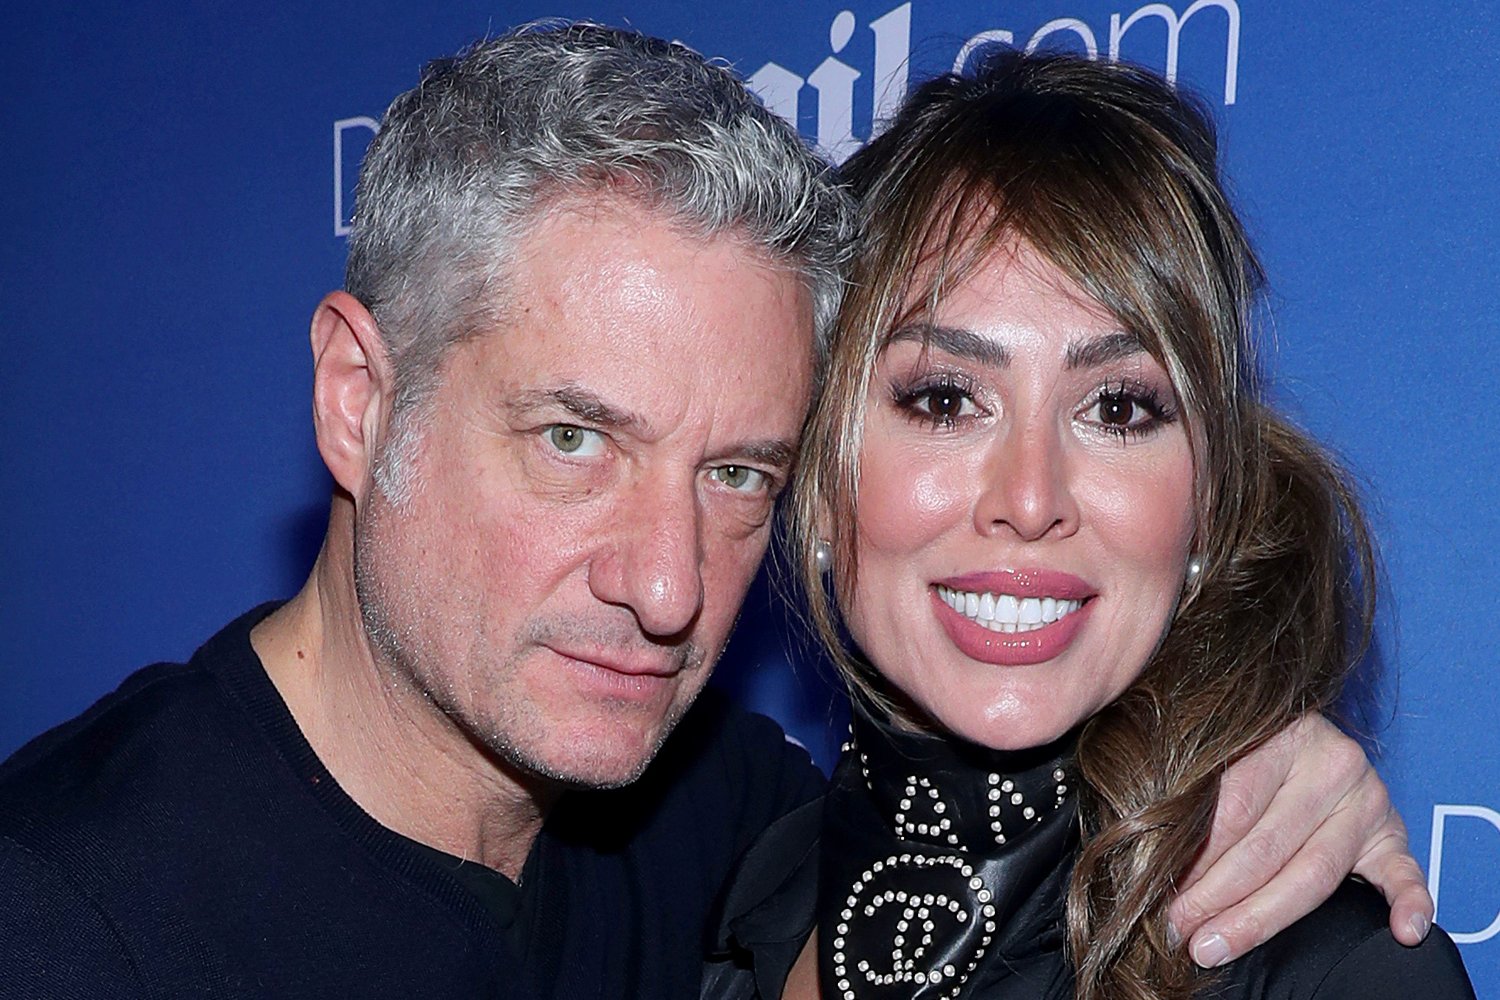 Rick Leventhal and Kelly Dodd